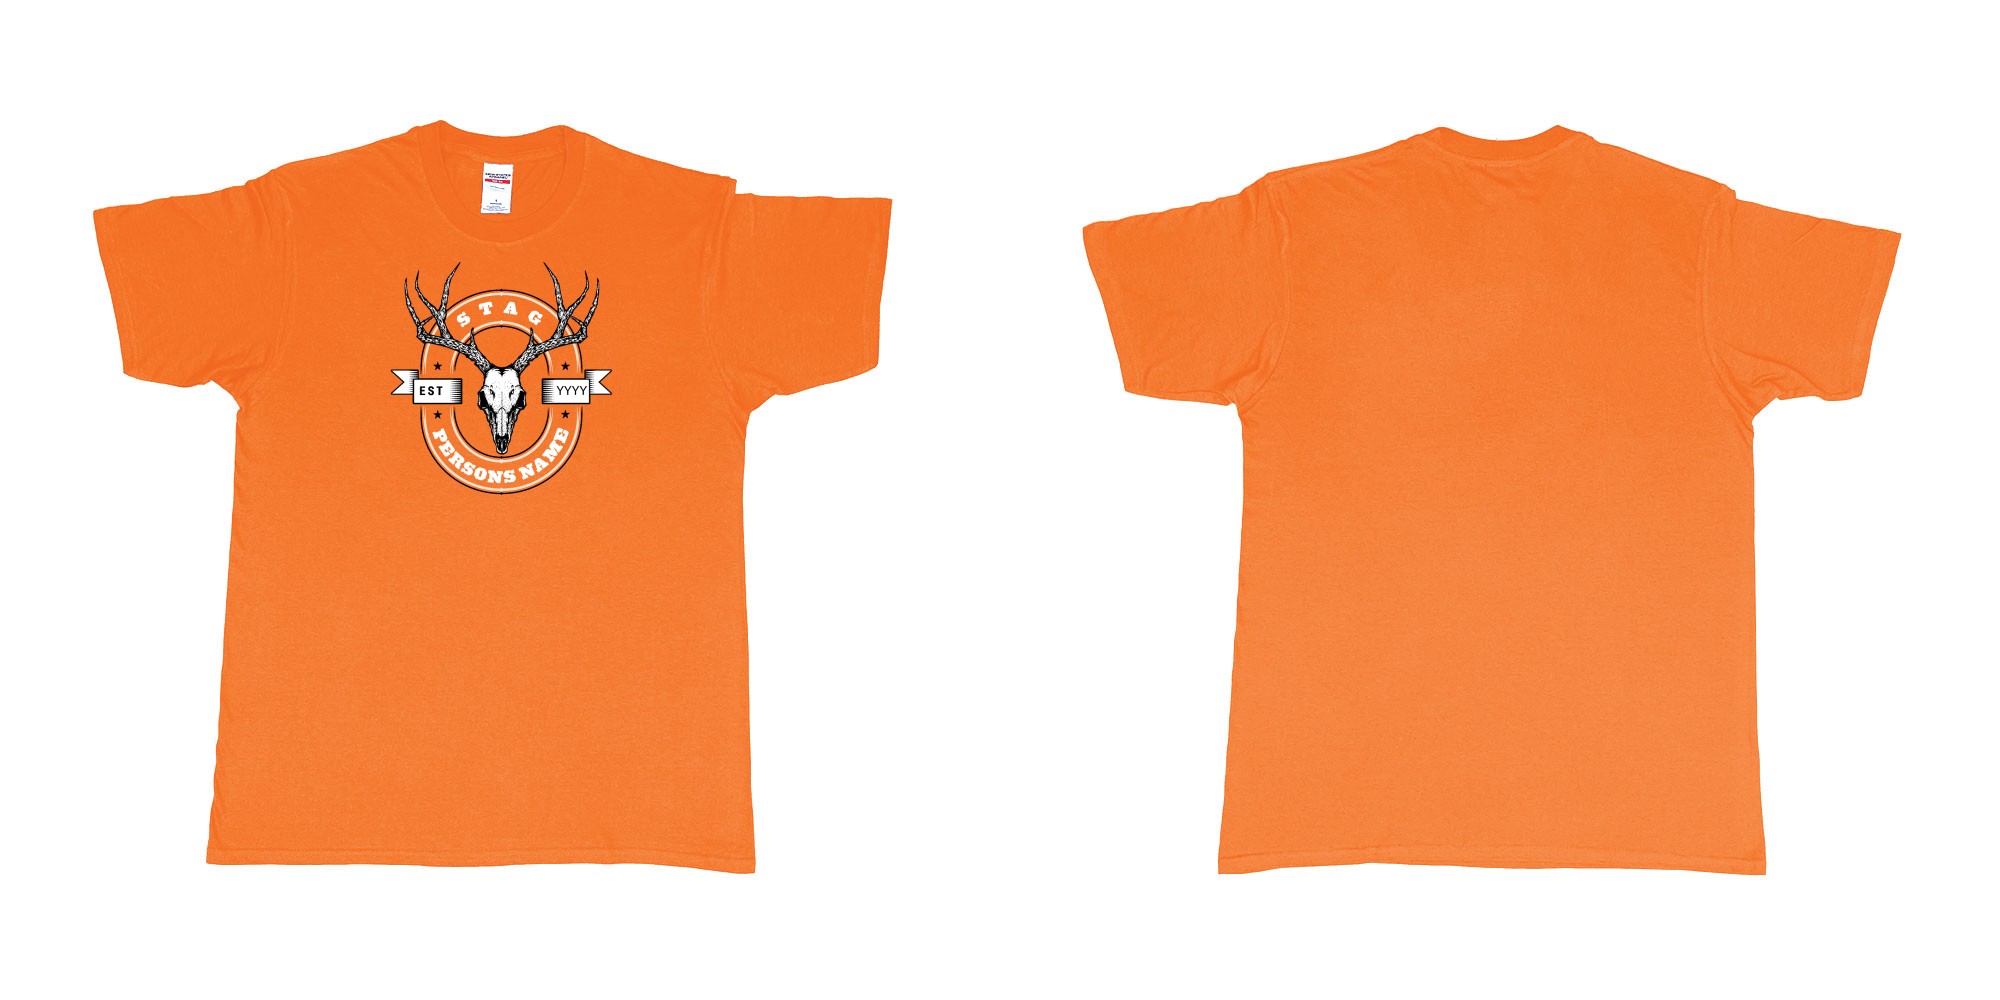 Custom tshirt design stag heads dead beer style in fabric color orange choice your own text made in Bali by The Pirate Way